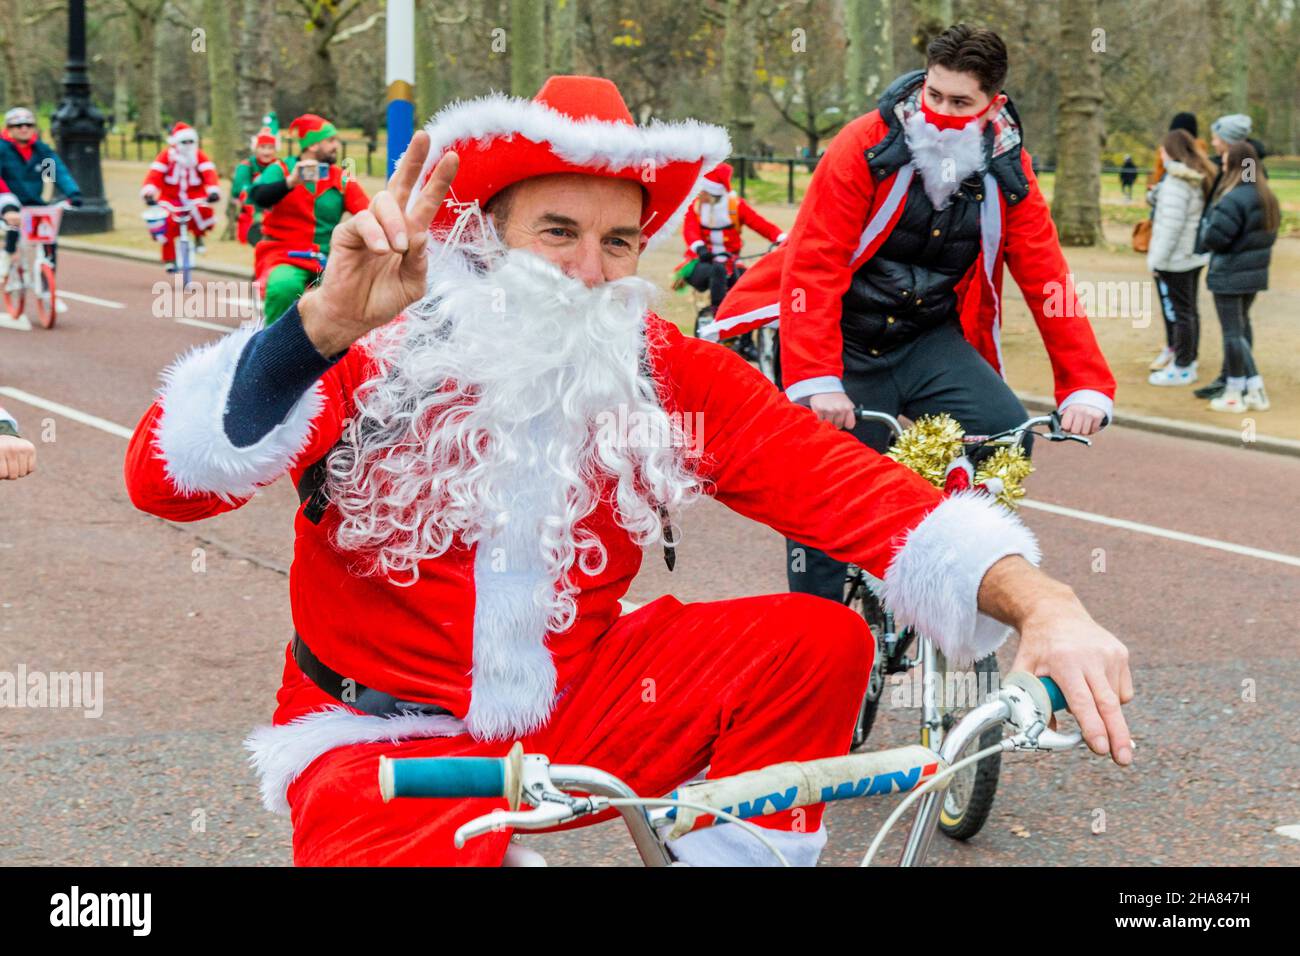 London, UK. 11th Dec, 2021. Riding down the Mall in Sant suits - The BMX Life Santa Cruise bike ride in support of the ECHO (Evelina Childrens Heart Organisation) children's heart charity. Credit: Guy Bell/Alamy Live News Stock Photo